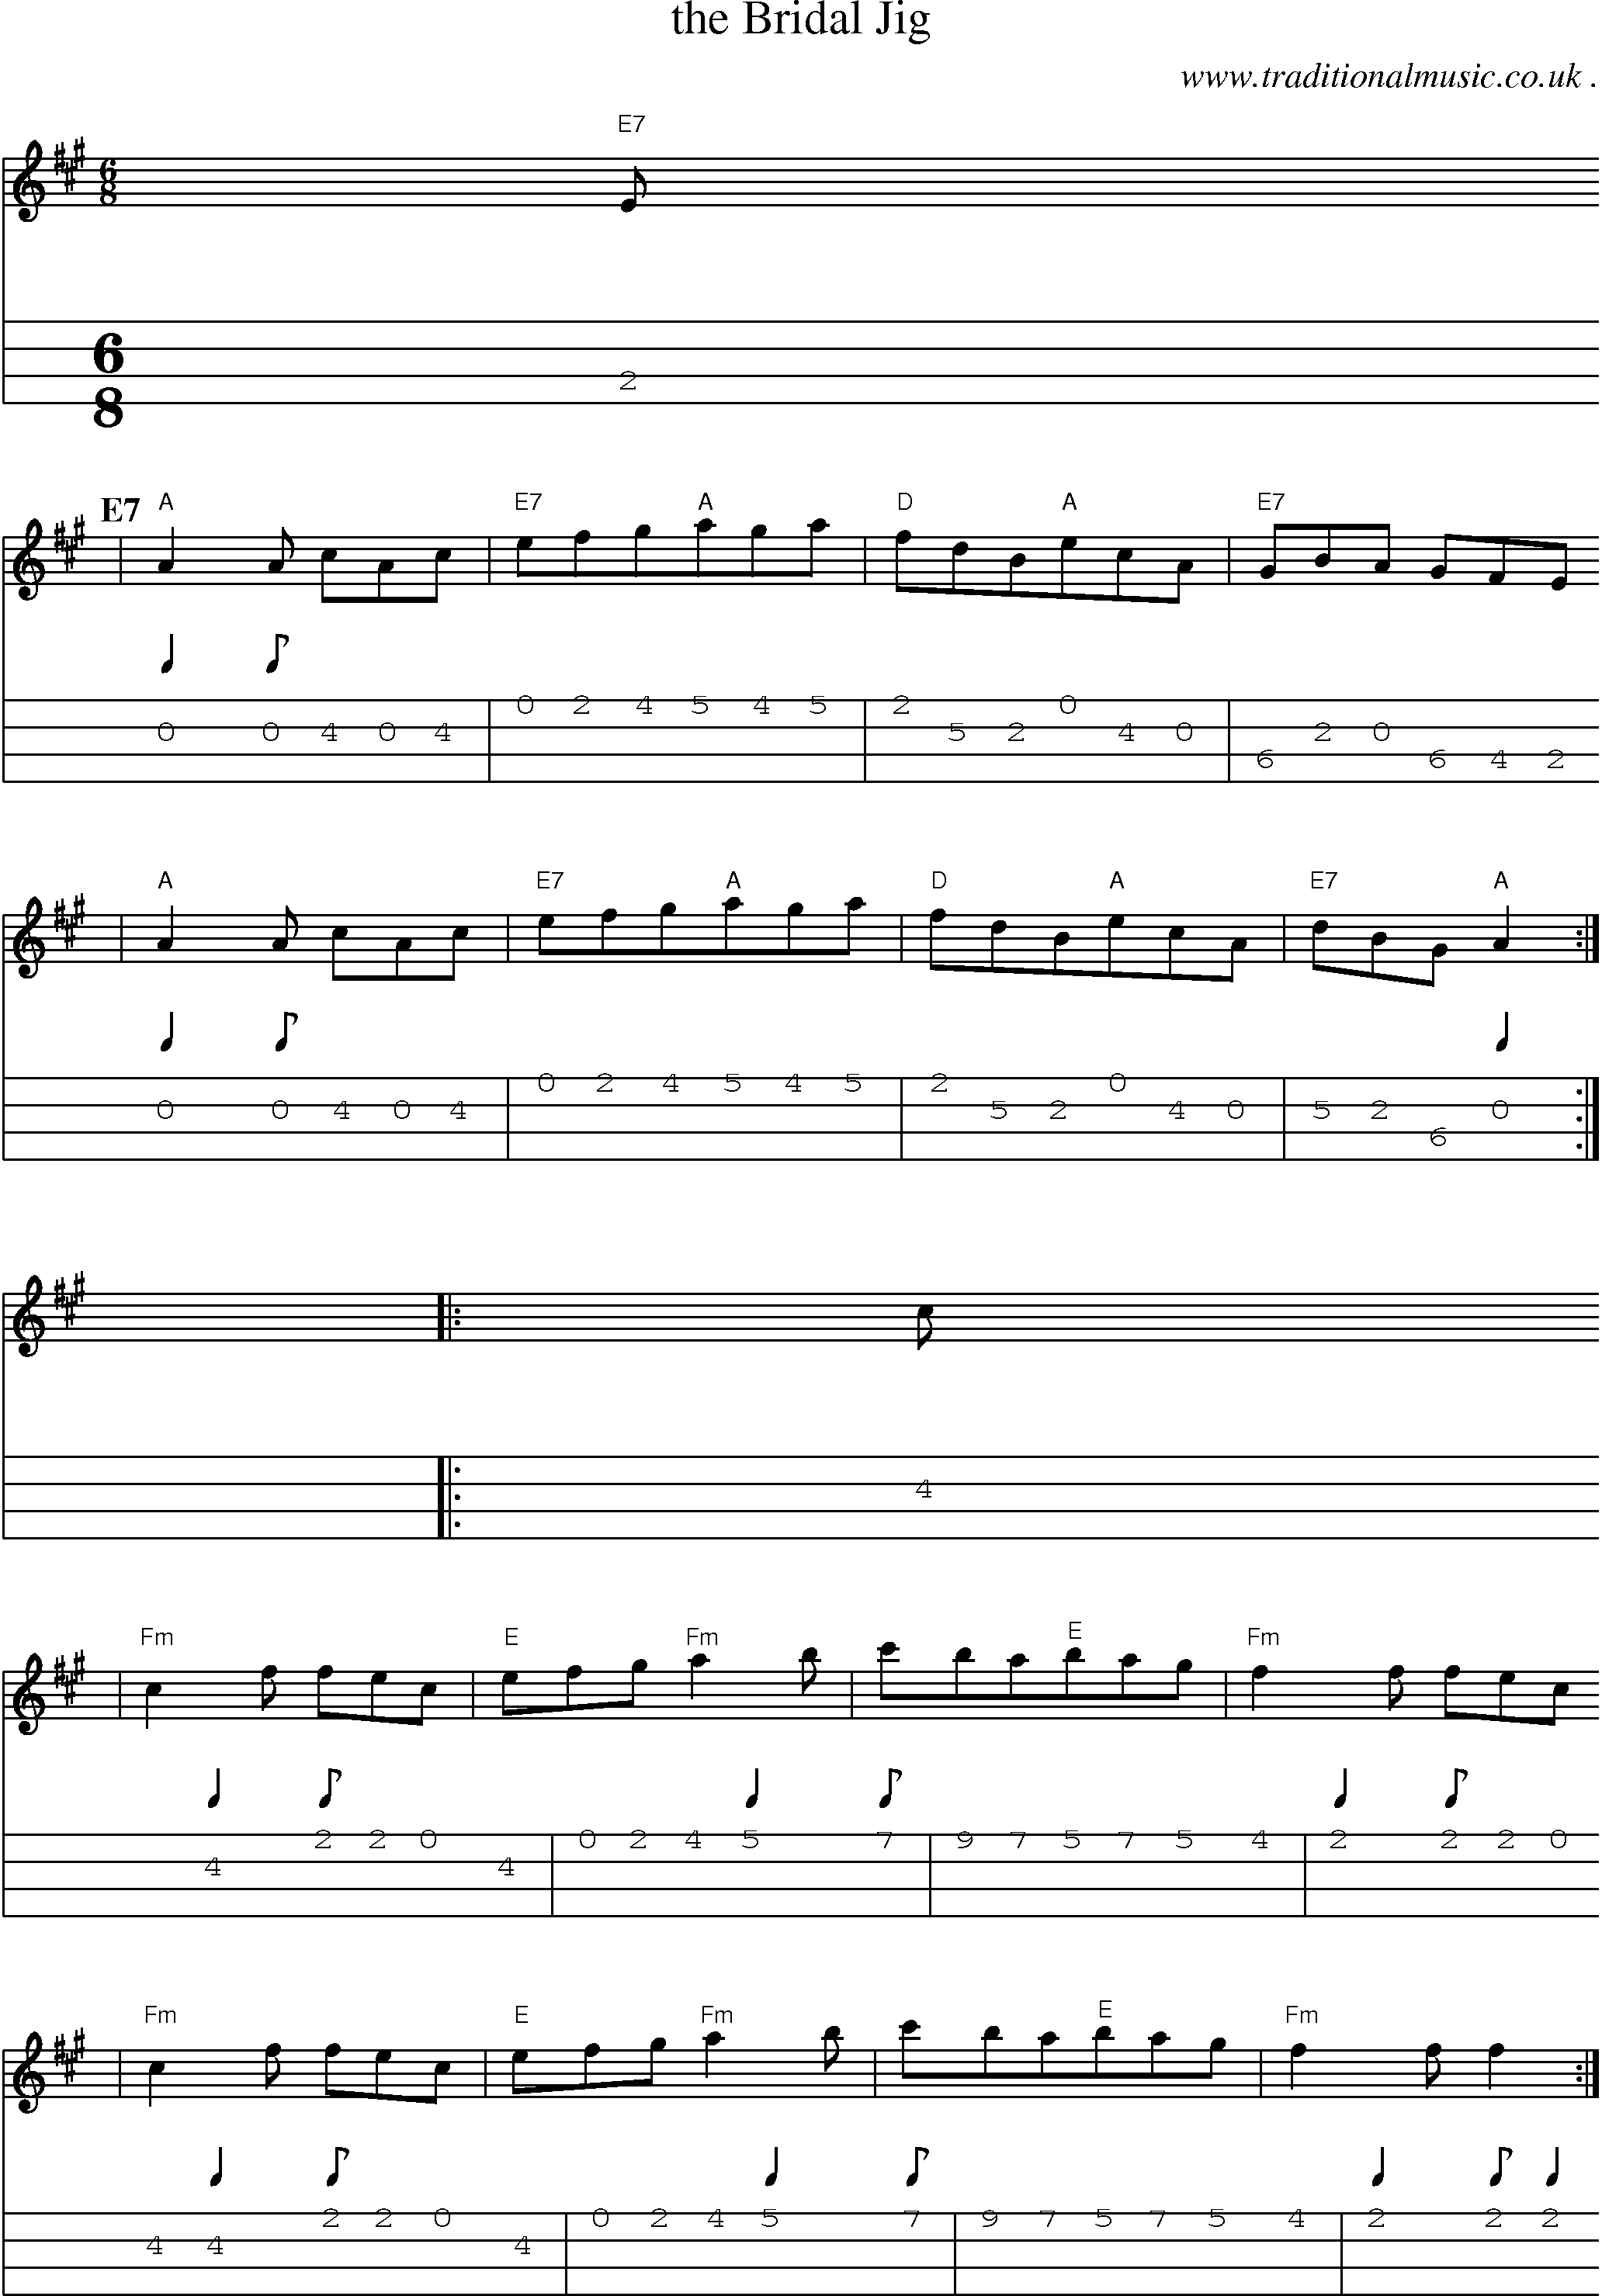 Sheet-Music and Mandolin Tabs for The Bridal Jig